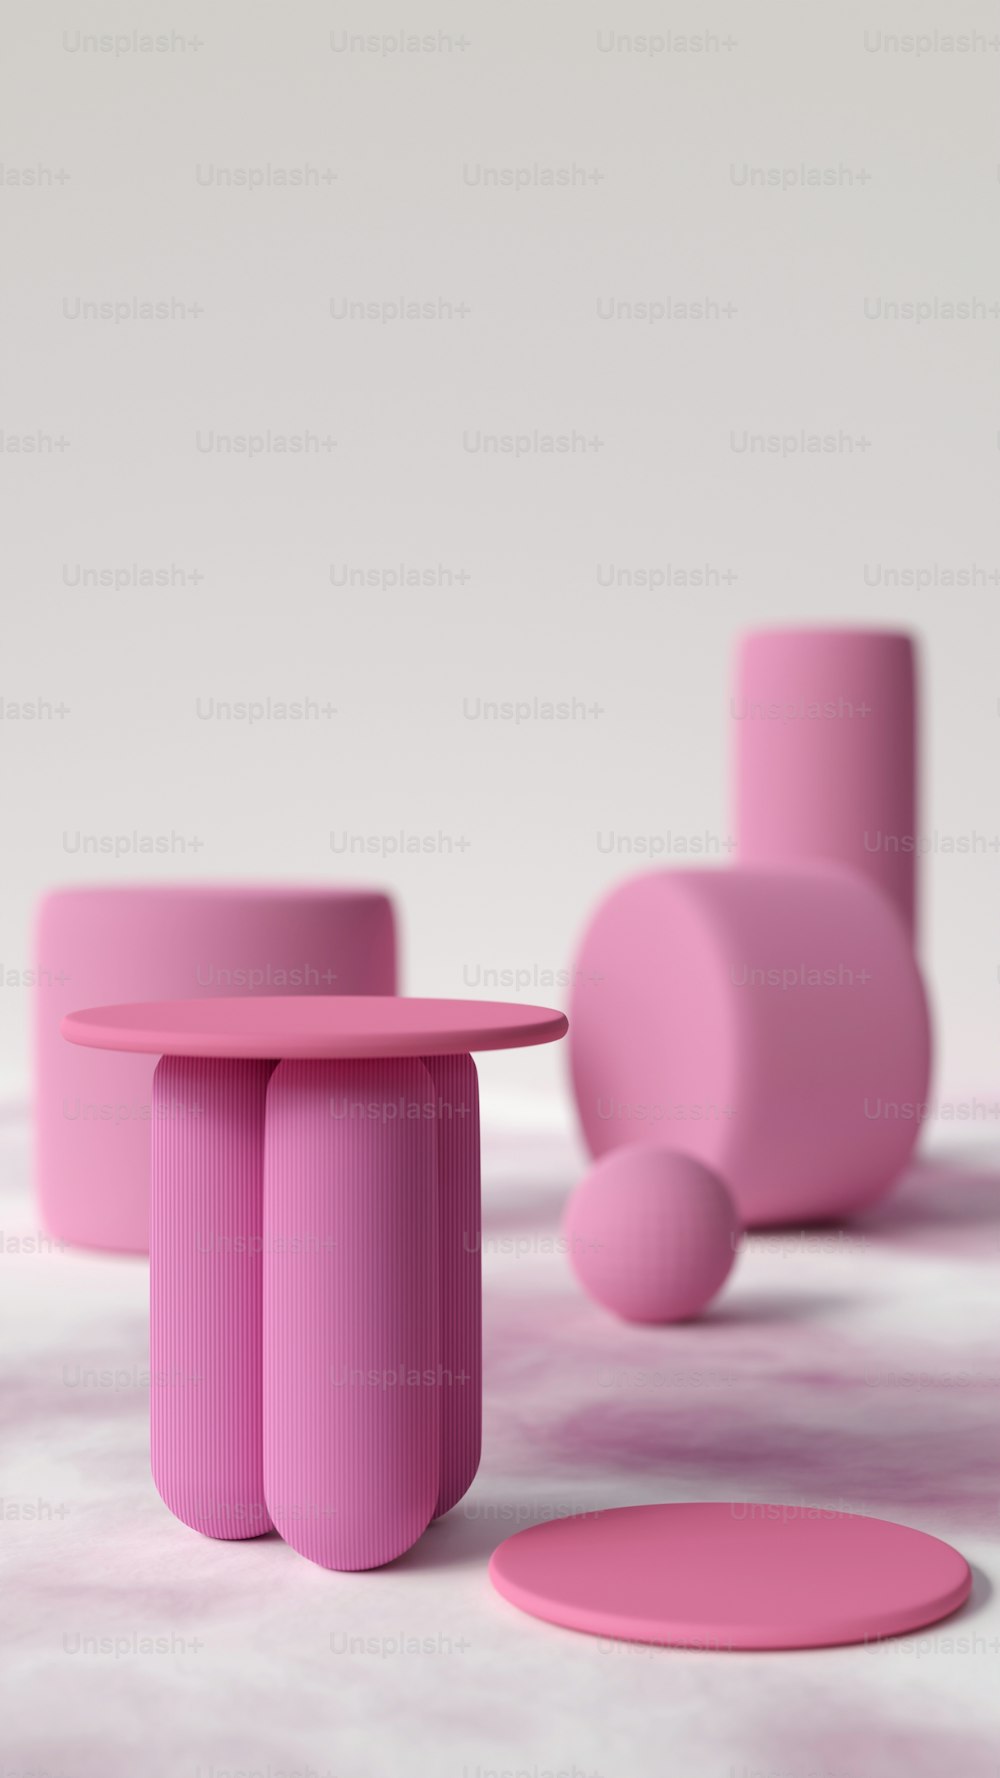 a group of pink tables and stools on a white surface